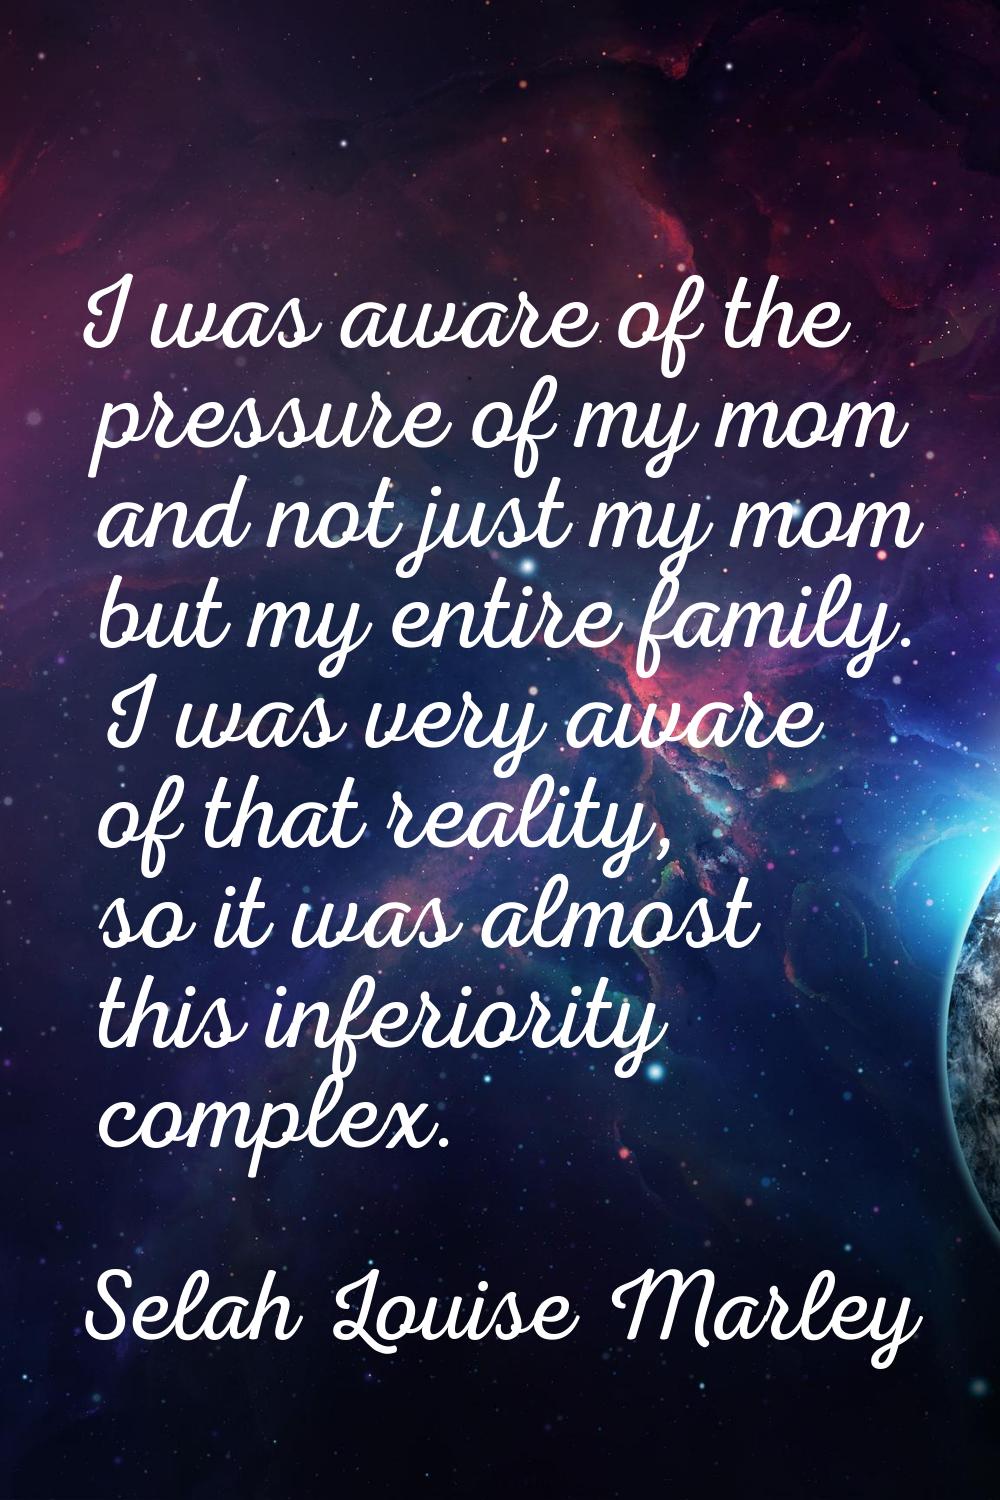 I was aware of the pressure of my mom and not just my mom but my entire family. I was very aware of